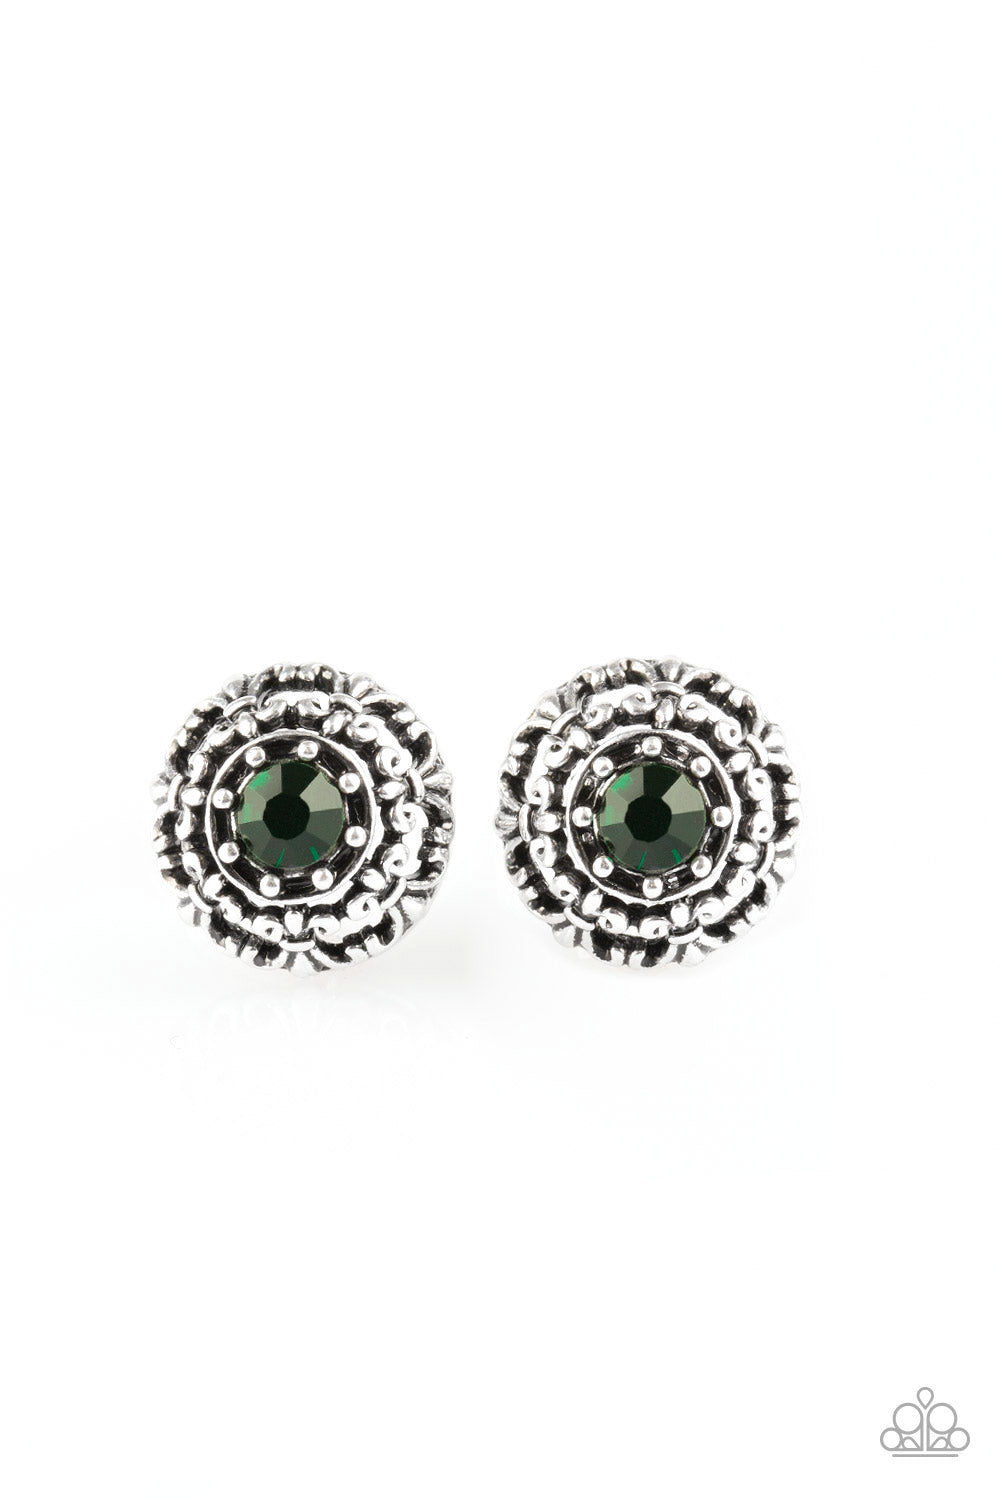 paparazzi-accessories-courtly-courtliness-green-post earrings